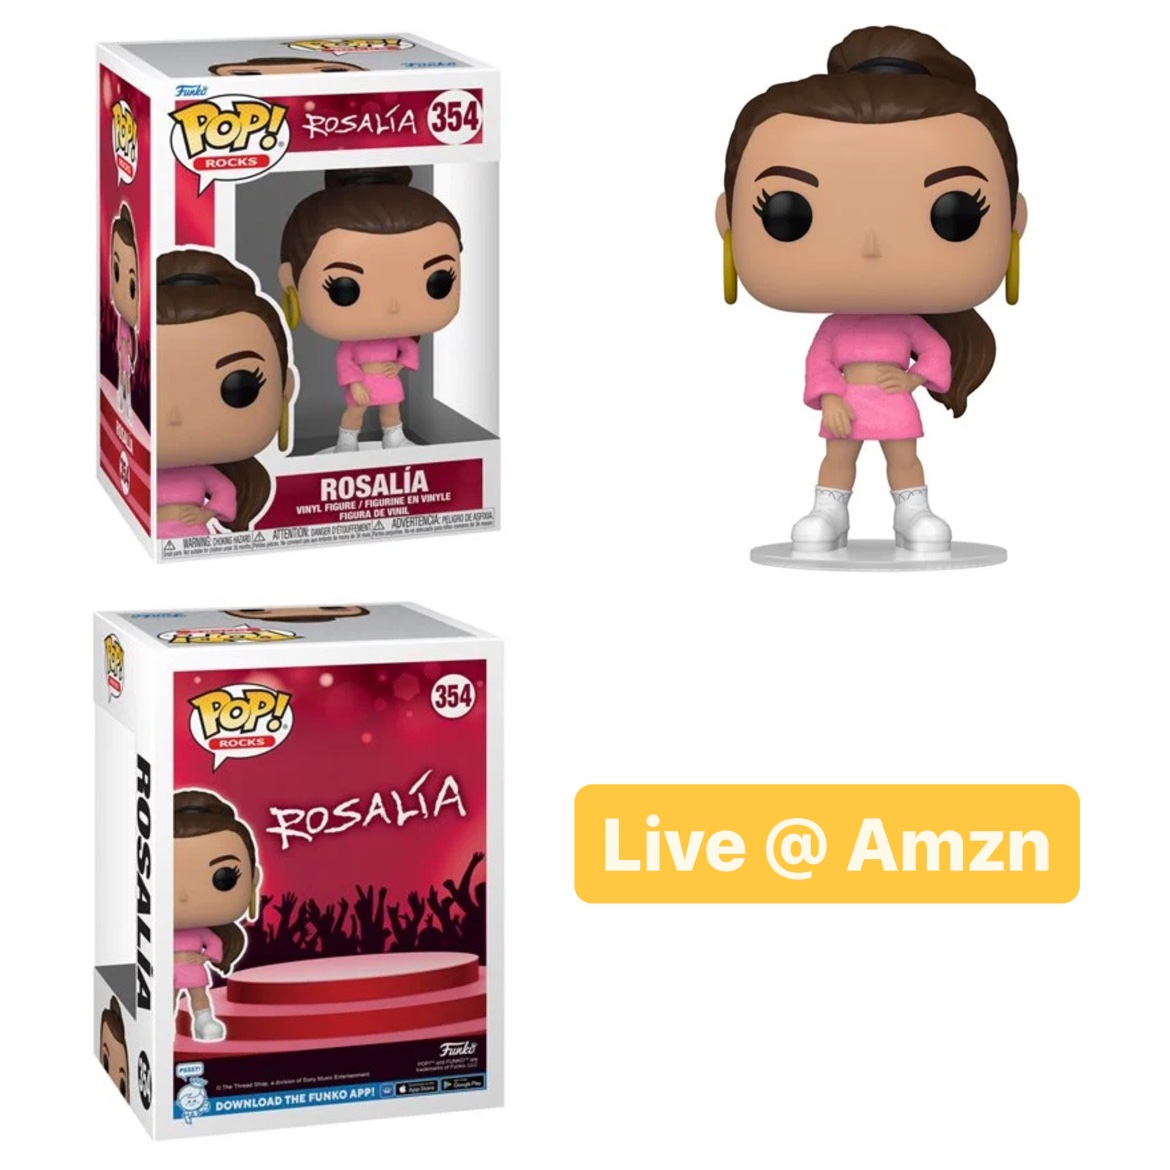 Are Singer's funk pops on sale for a considerable amount of time or do they  usually stop making them quickly? There's a Rosalia Funko Pop launching  this summer and I wanna make